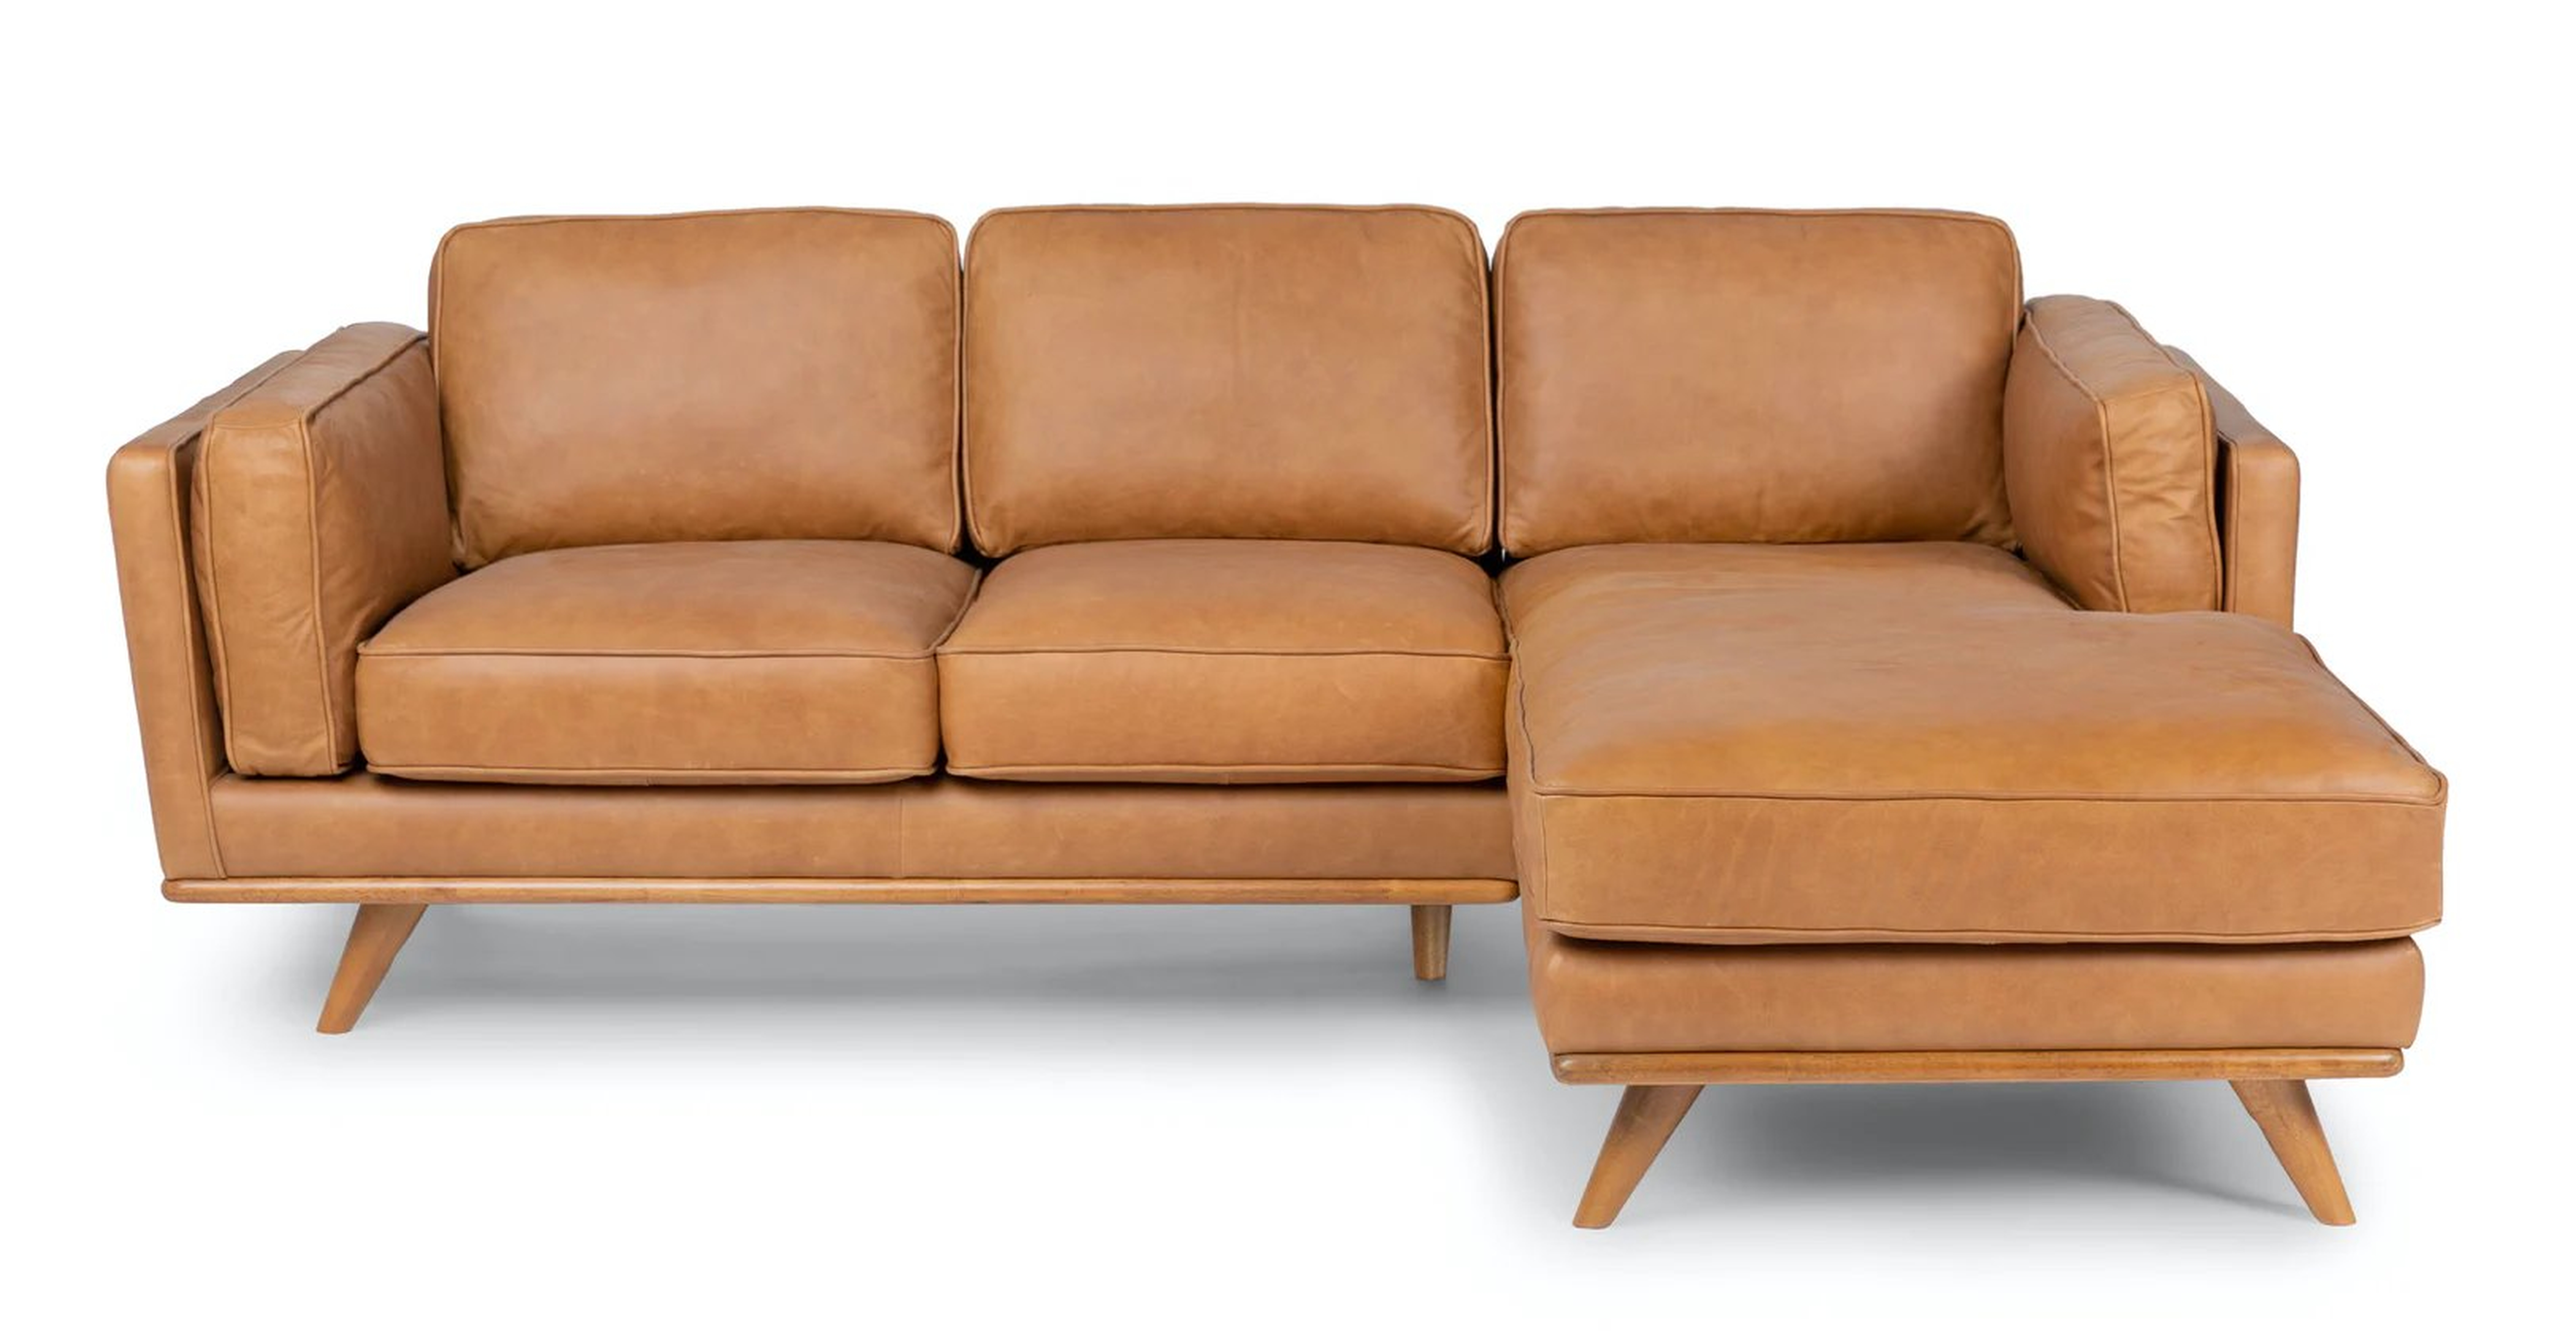 Timber Charme Right Sectional - Article